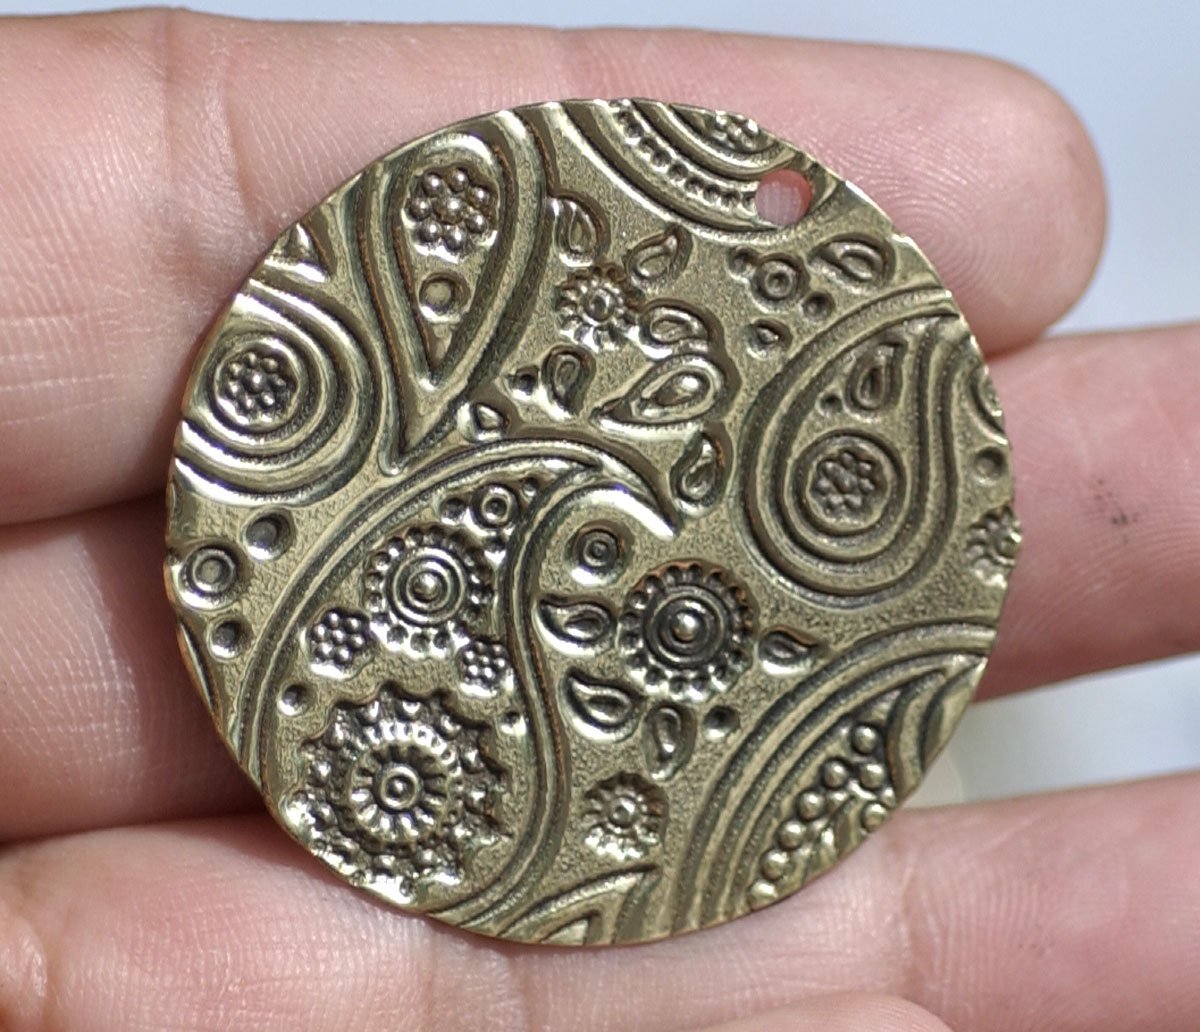 Blank with Paisley Texture Disc 35mm 26G with Hole, Metalworking Jewelry Supplies - 4 Pieces